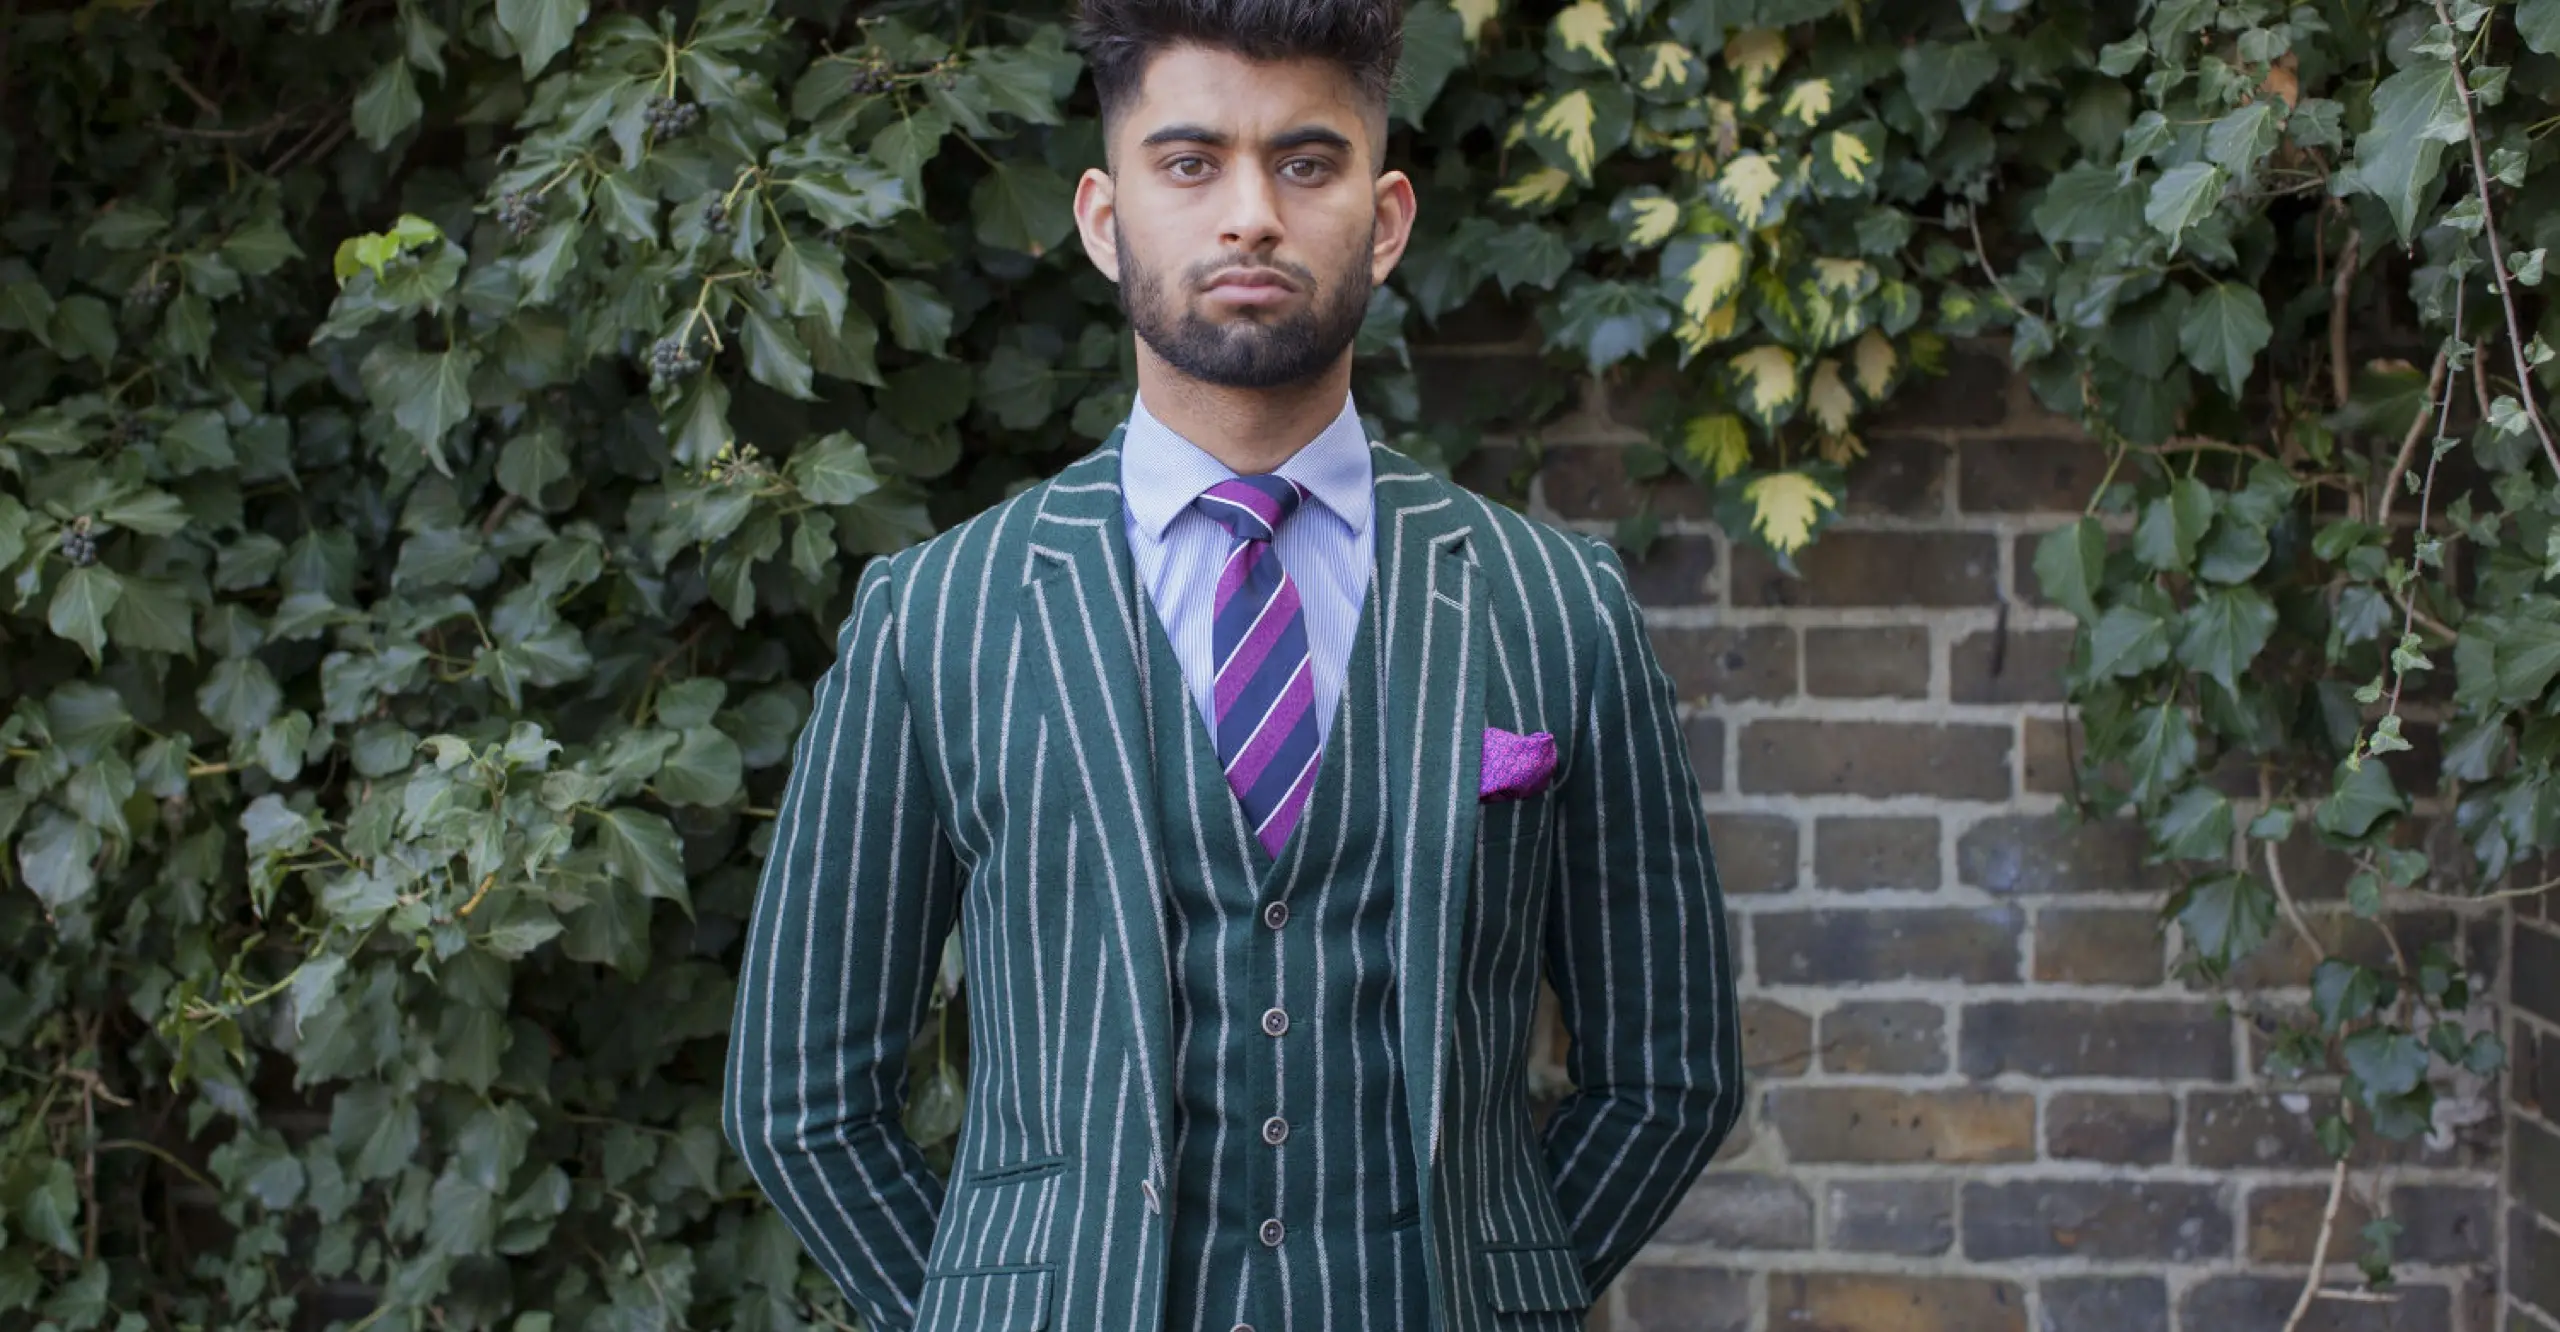 Landscape format portrait of a man wearing a green striped suit with a brick wall in the background